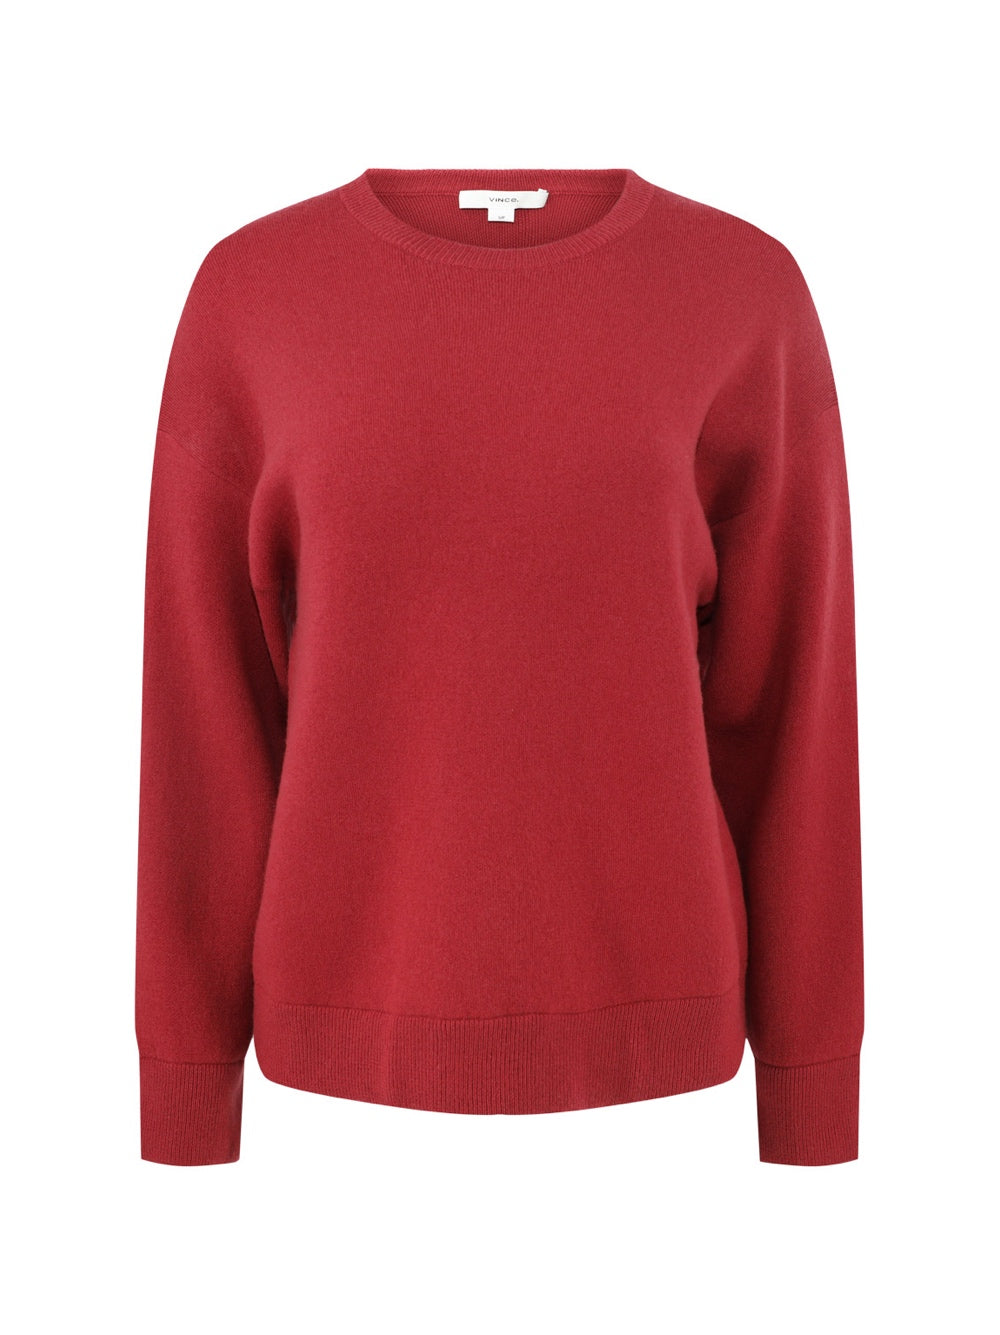 Vince Structured Wool-Blend Pullover Sweater in Raspberry